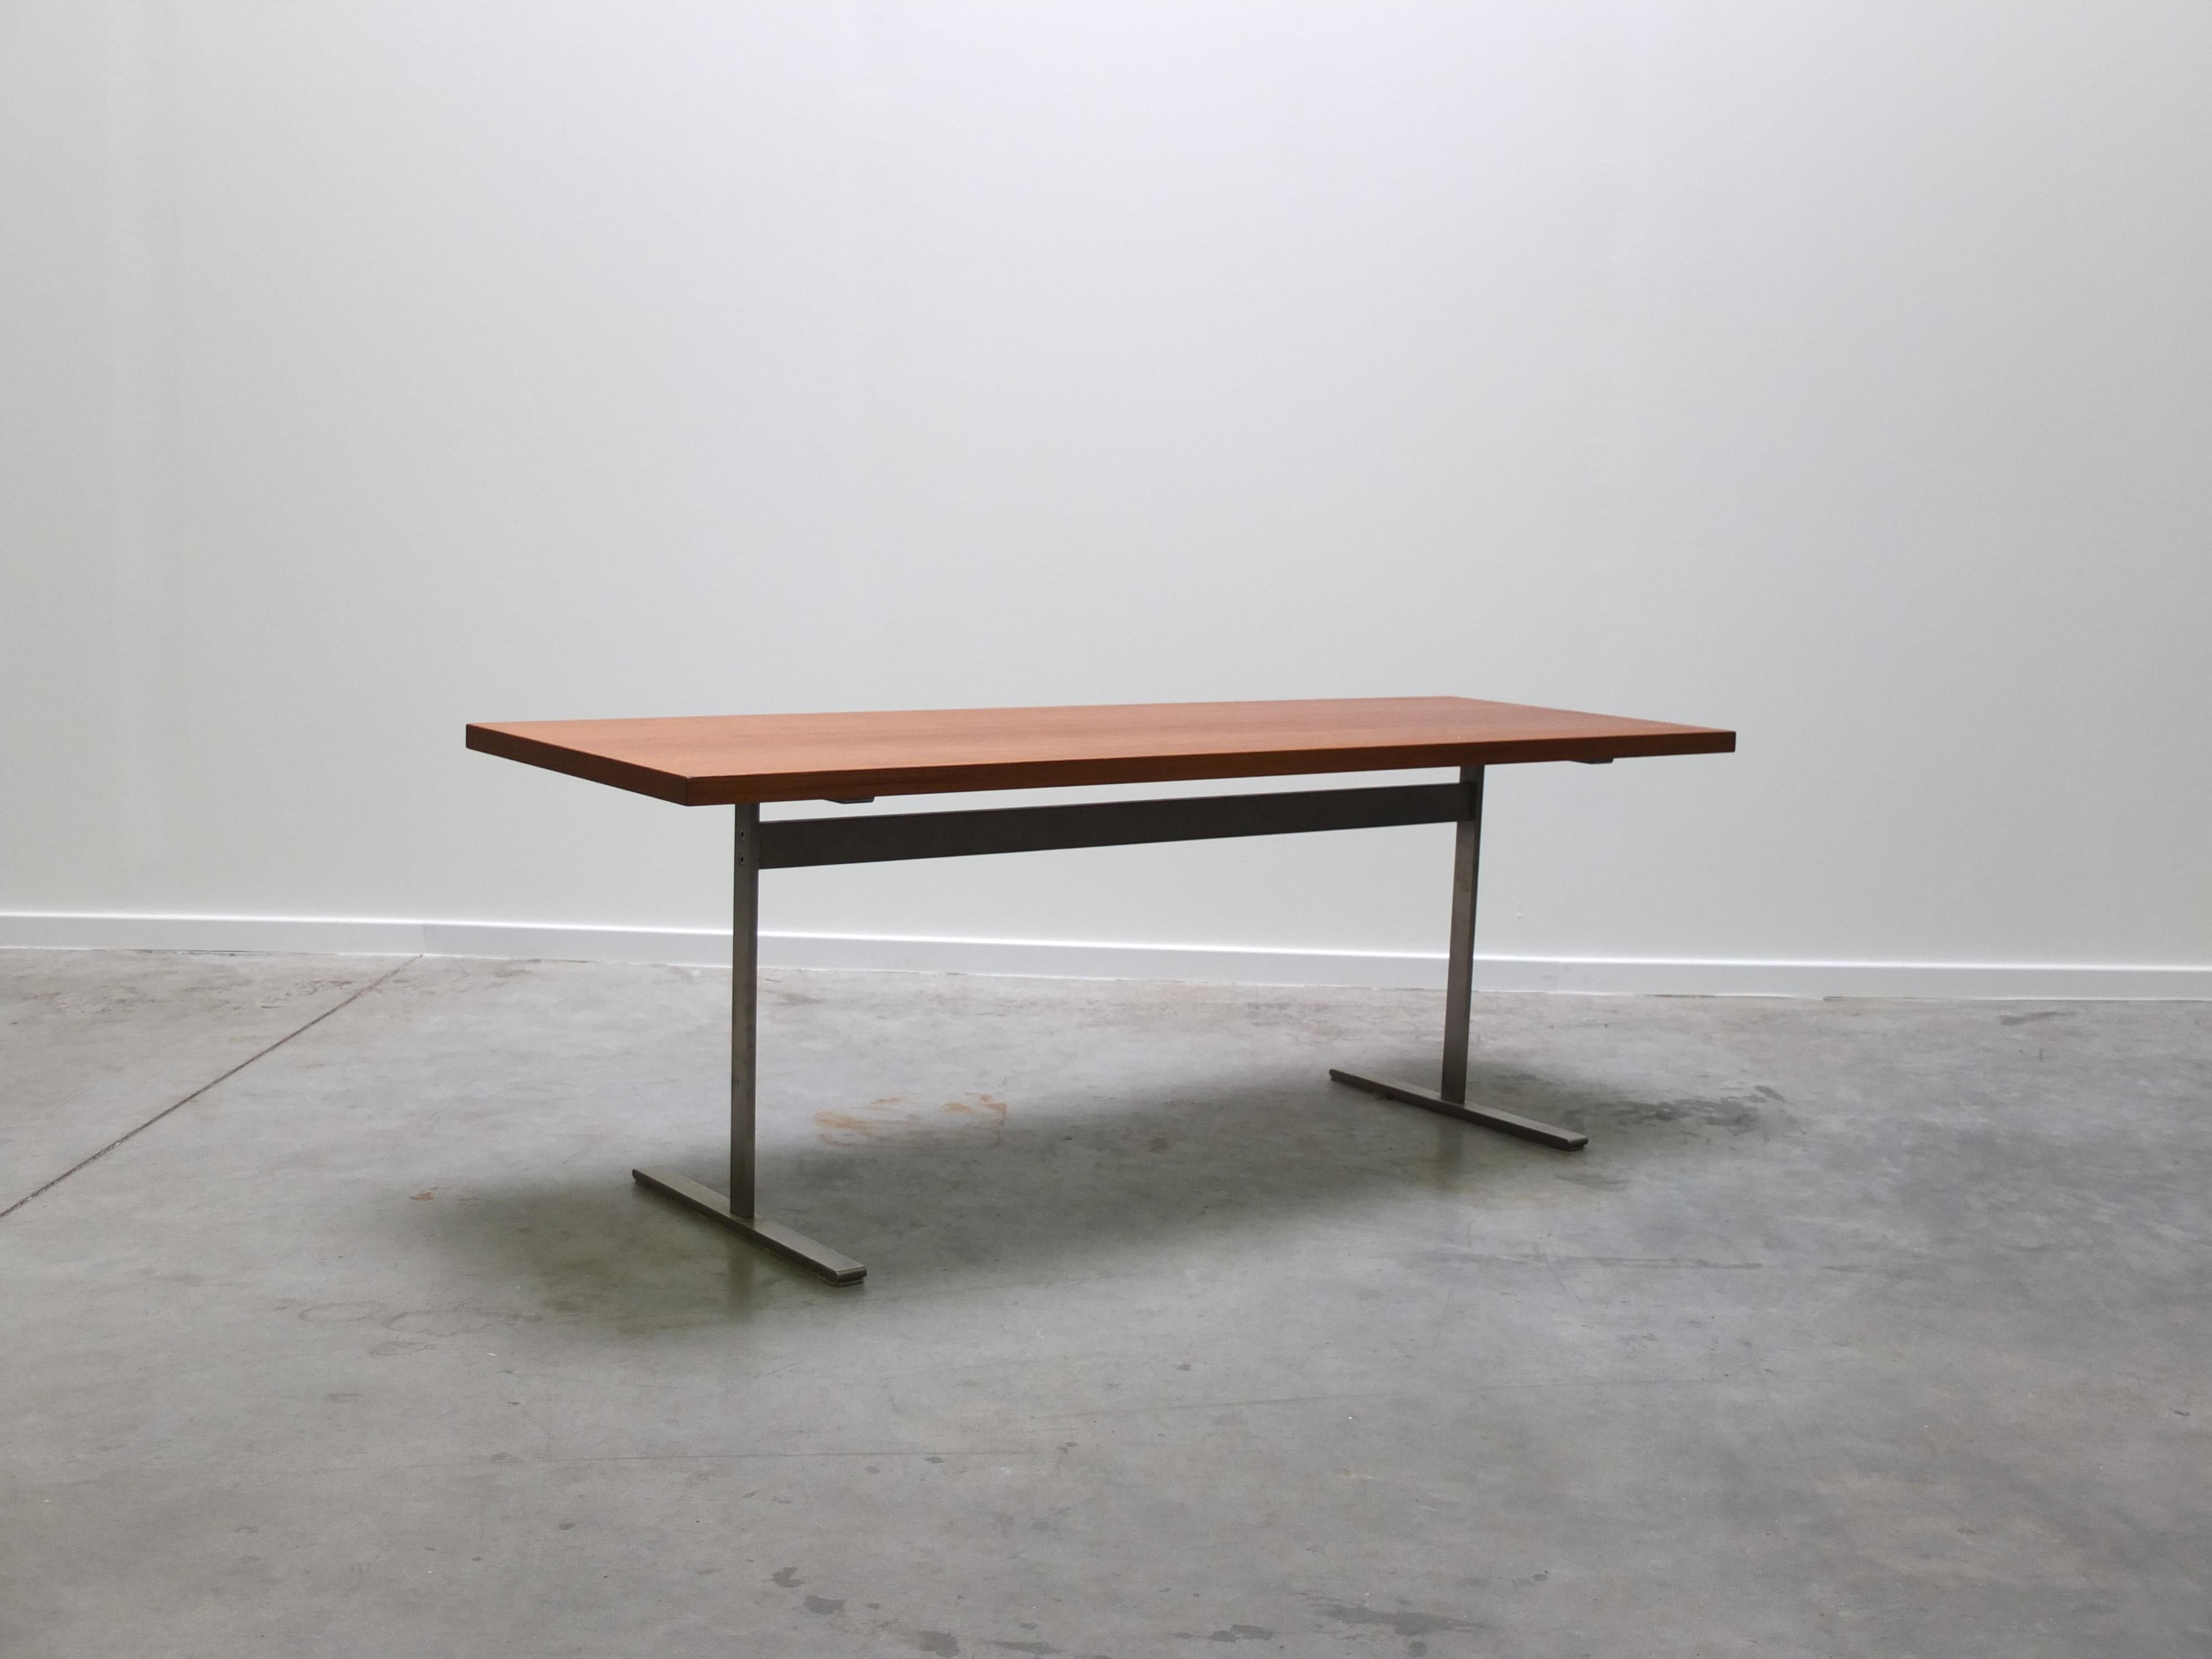 Danish Large Modernist Teak Coffee Table in the Style of Arne Jacobsen, 1960s For Sale